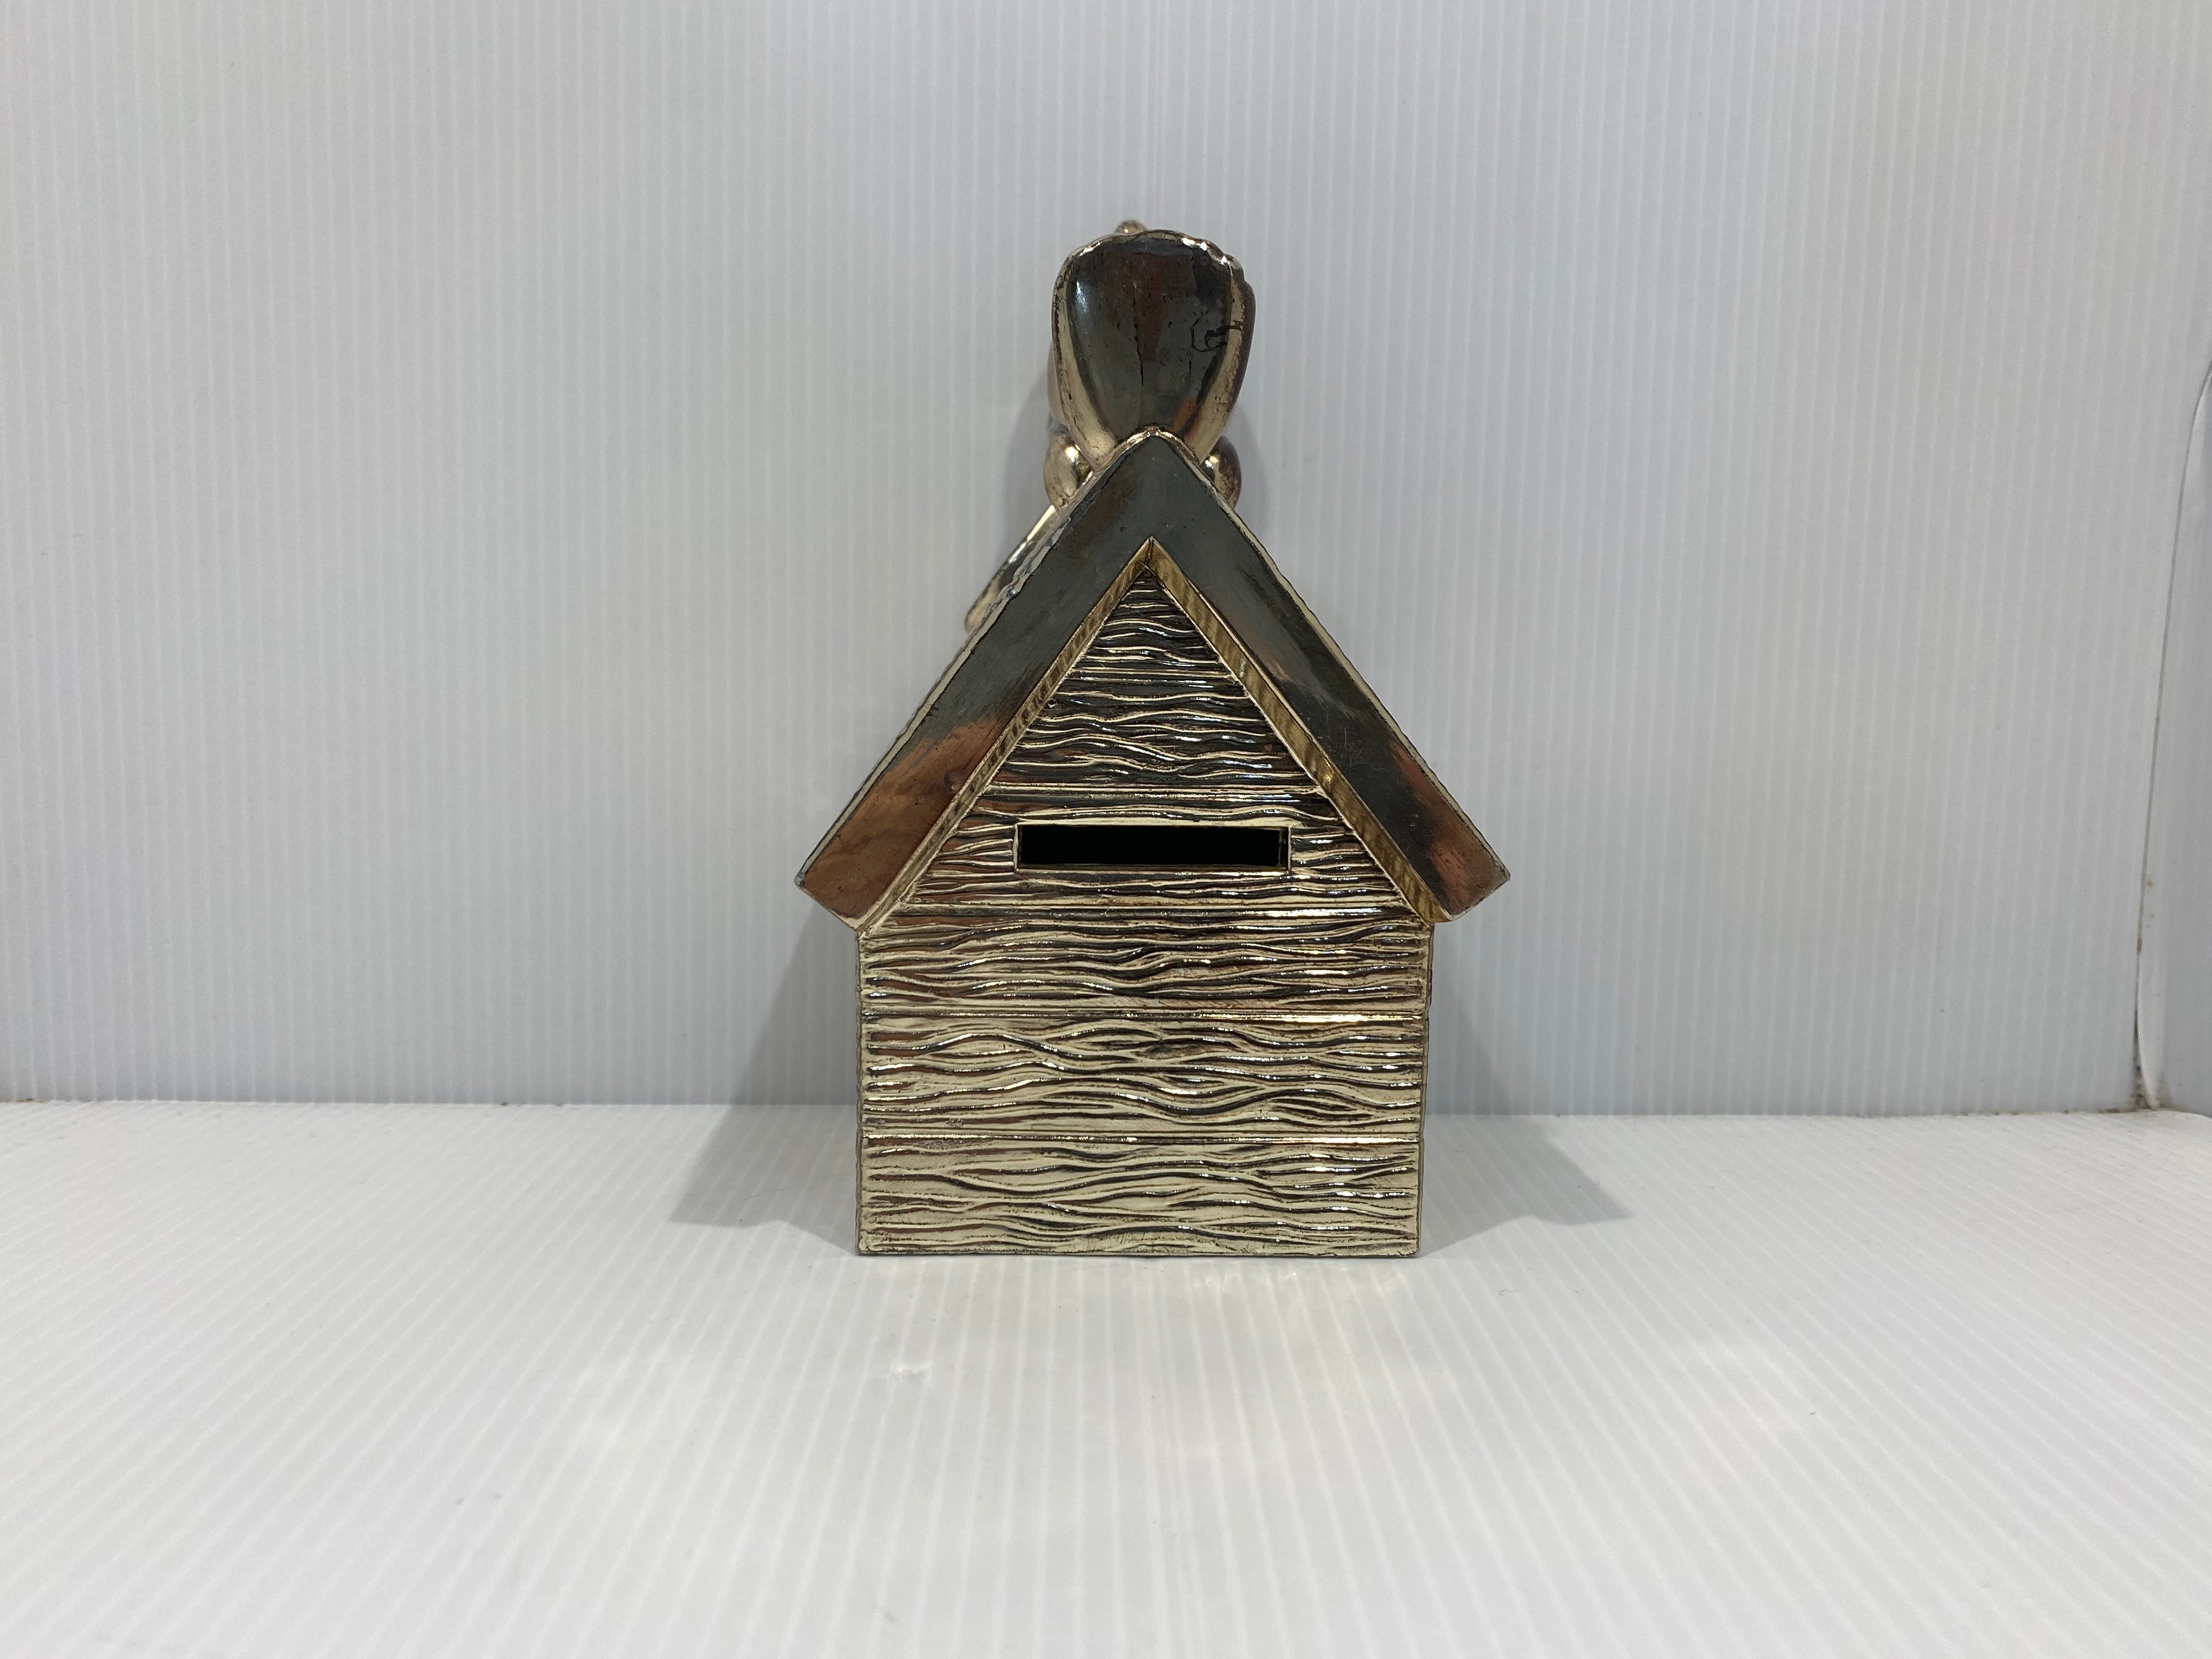 1958 silvered metal Bank, Snoopy on dog house